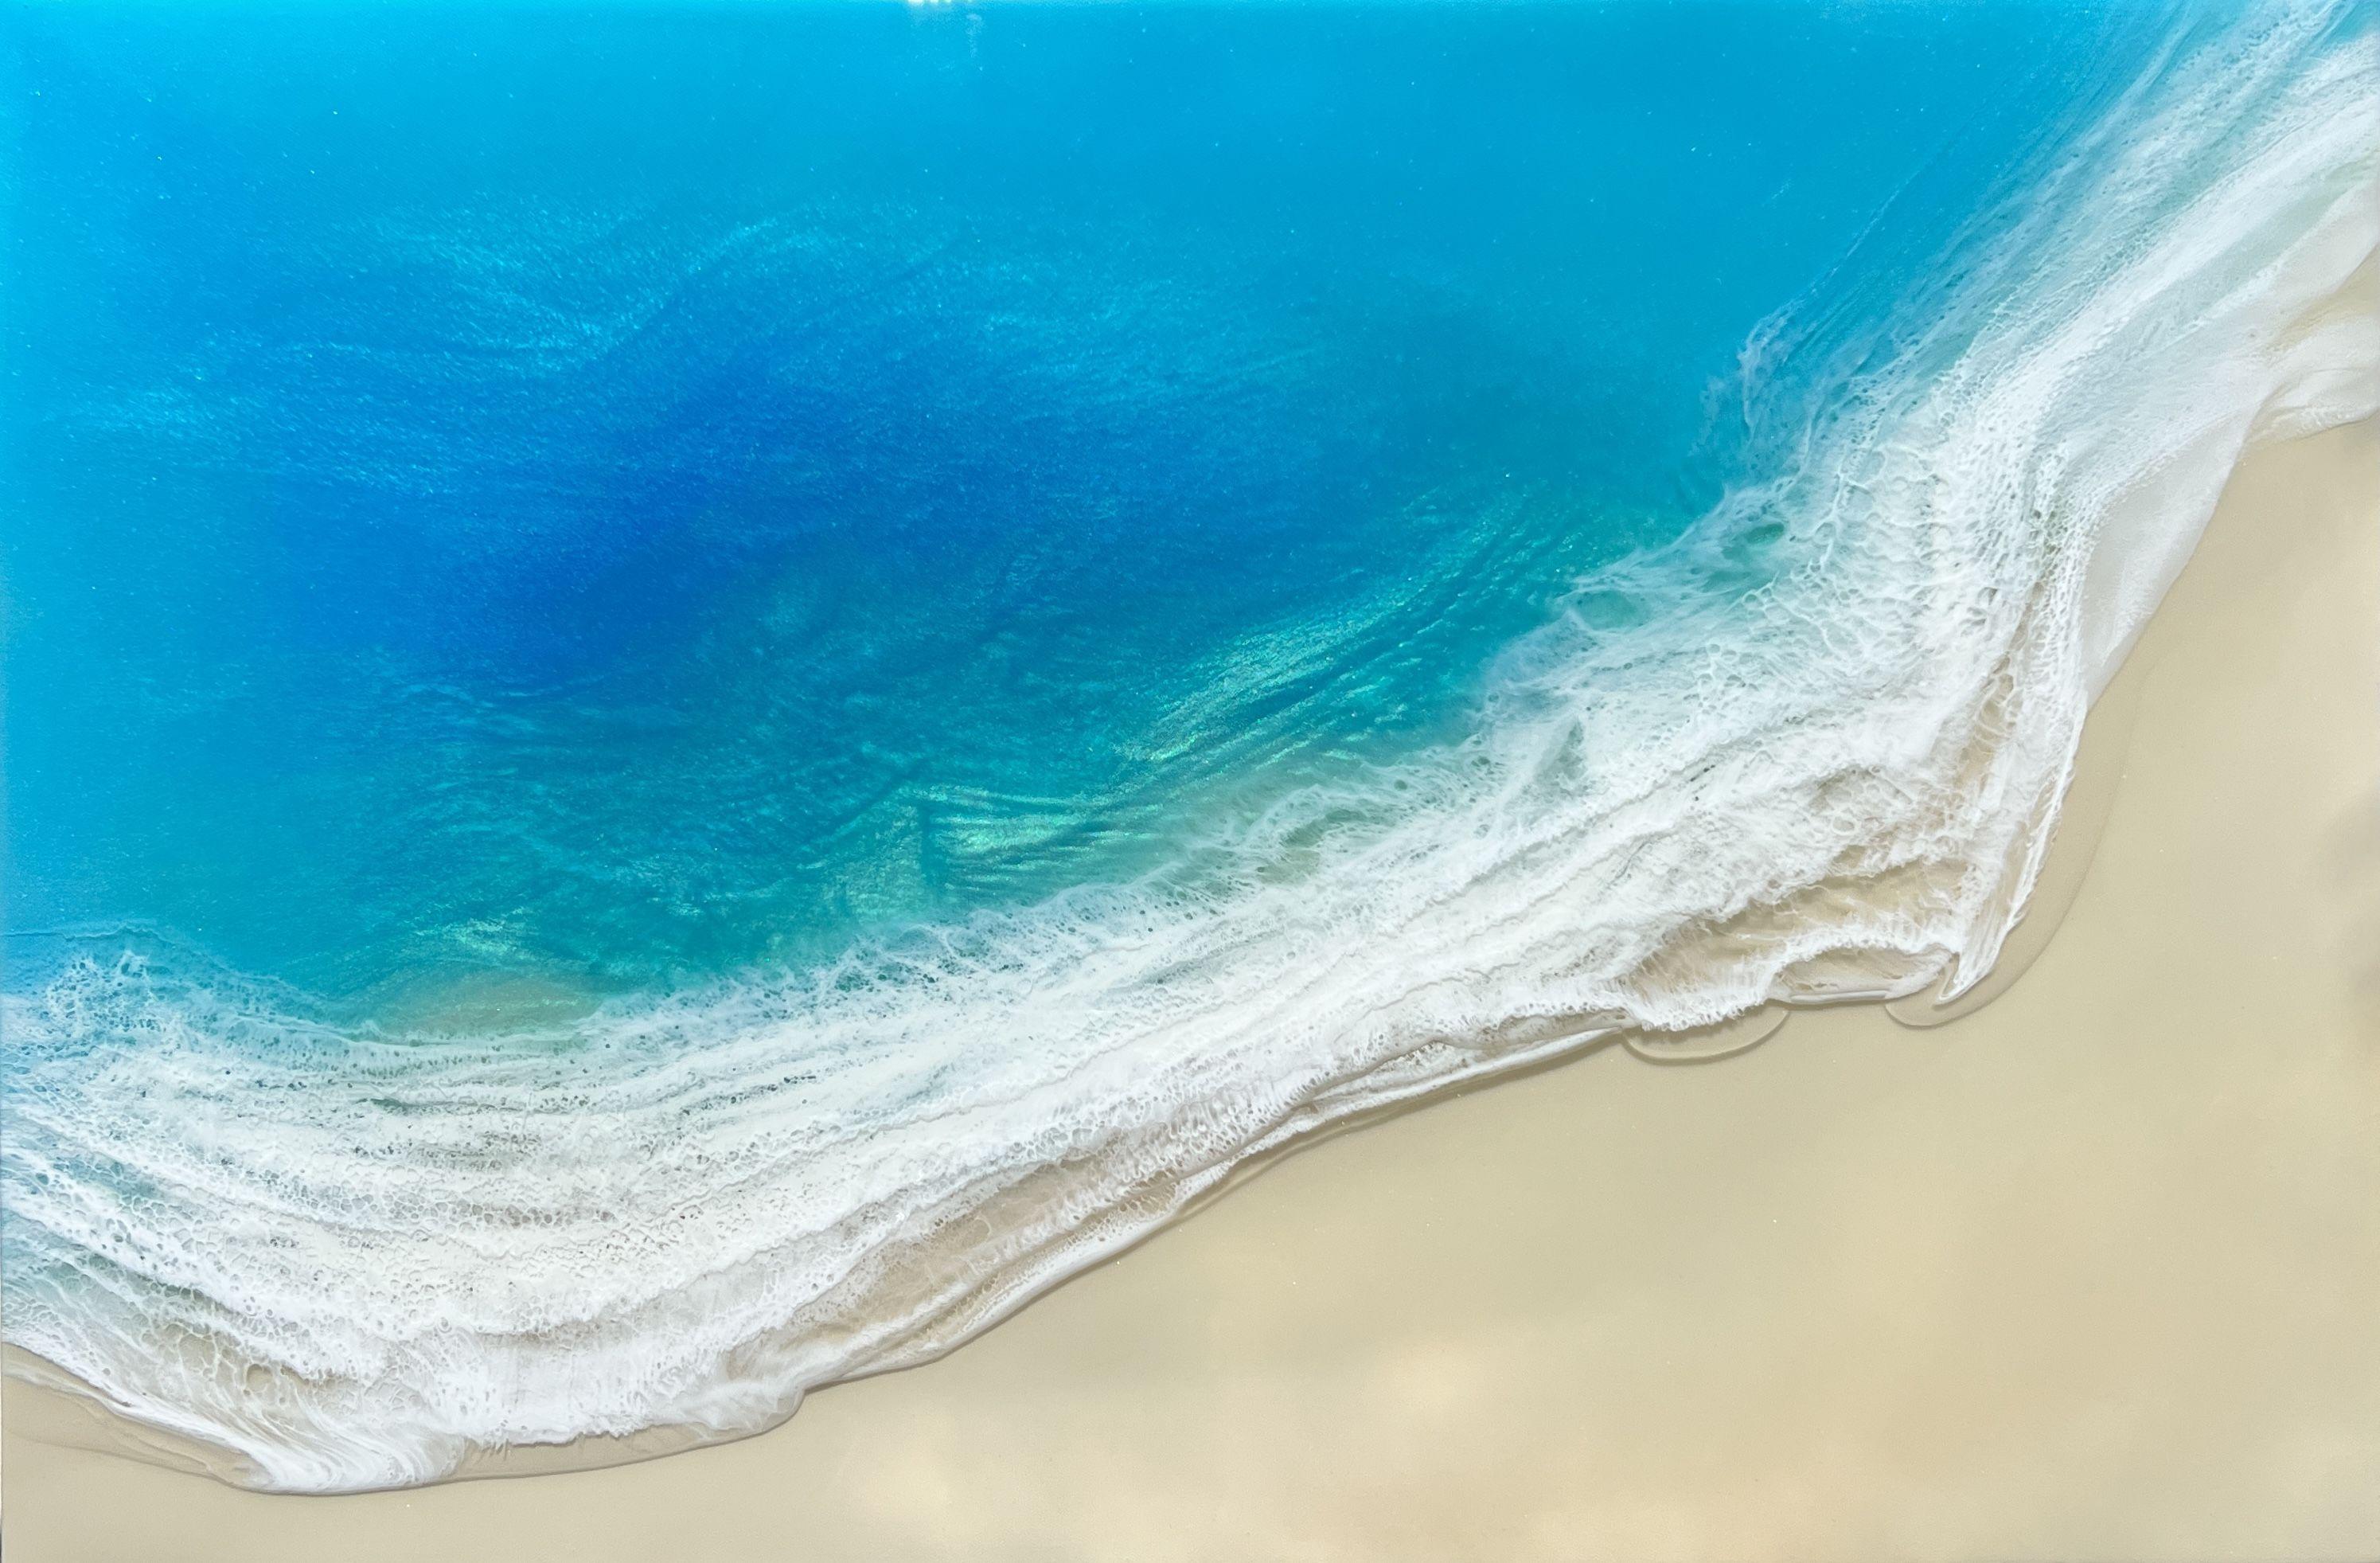 White Sand Seascape Painting - ocean painting    Original, one-of-a-kind, hand painted, inspired by there view The Bahamas and Turks And Caicos Islands seen from the airplane in my last vacation there    Different shades of blue, turquoise, teal,